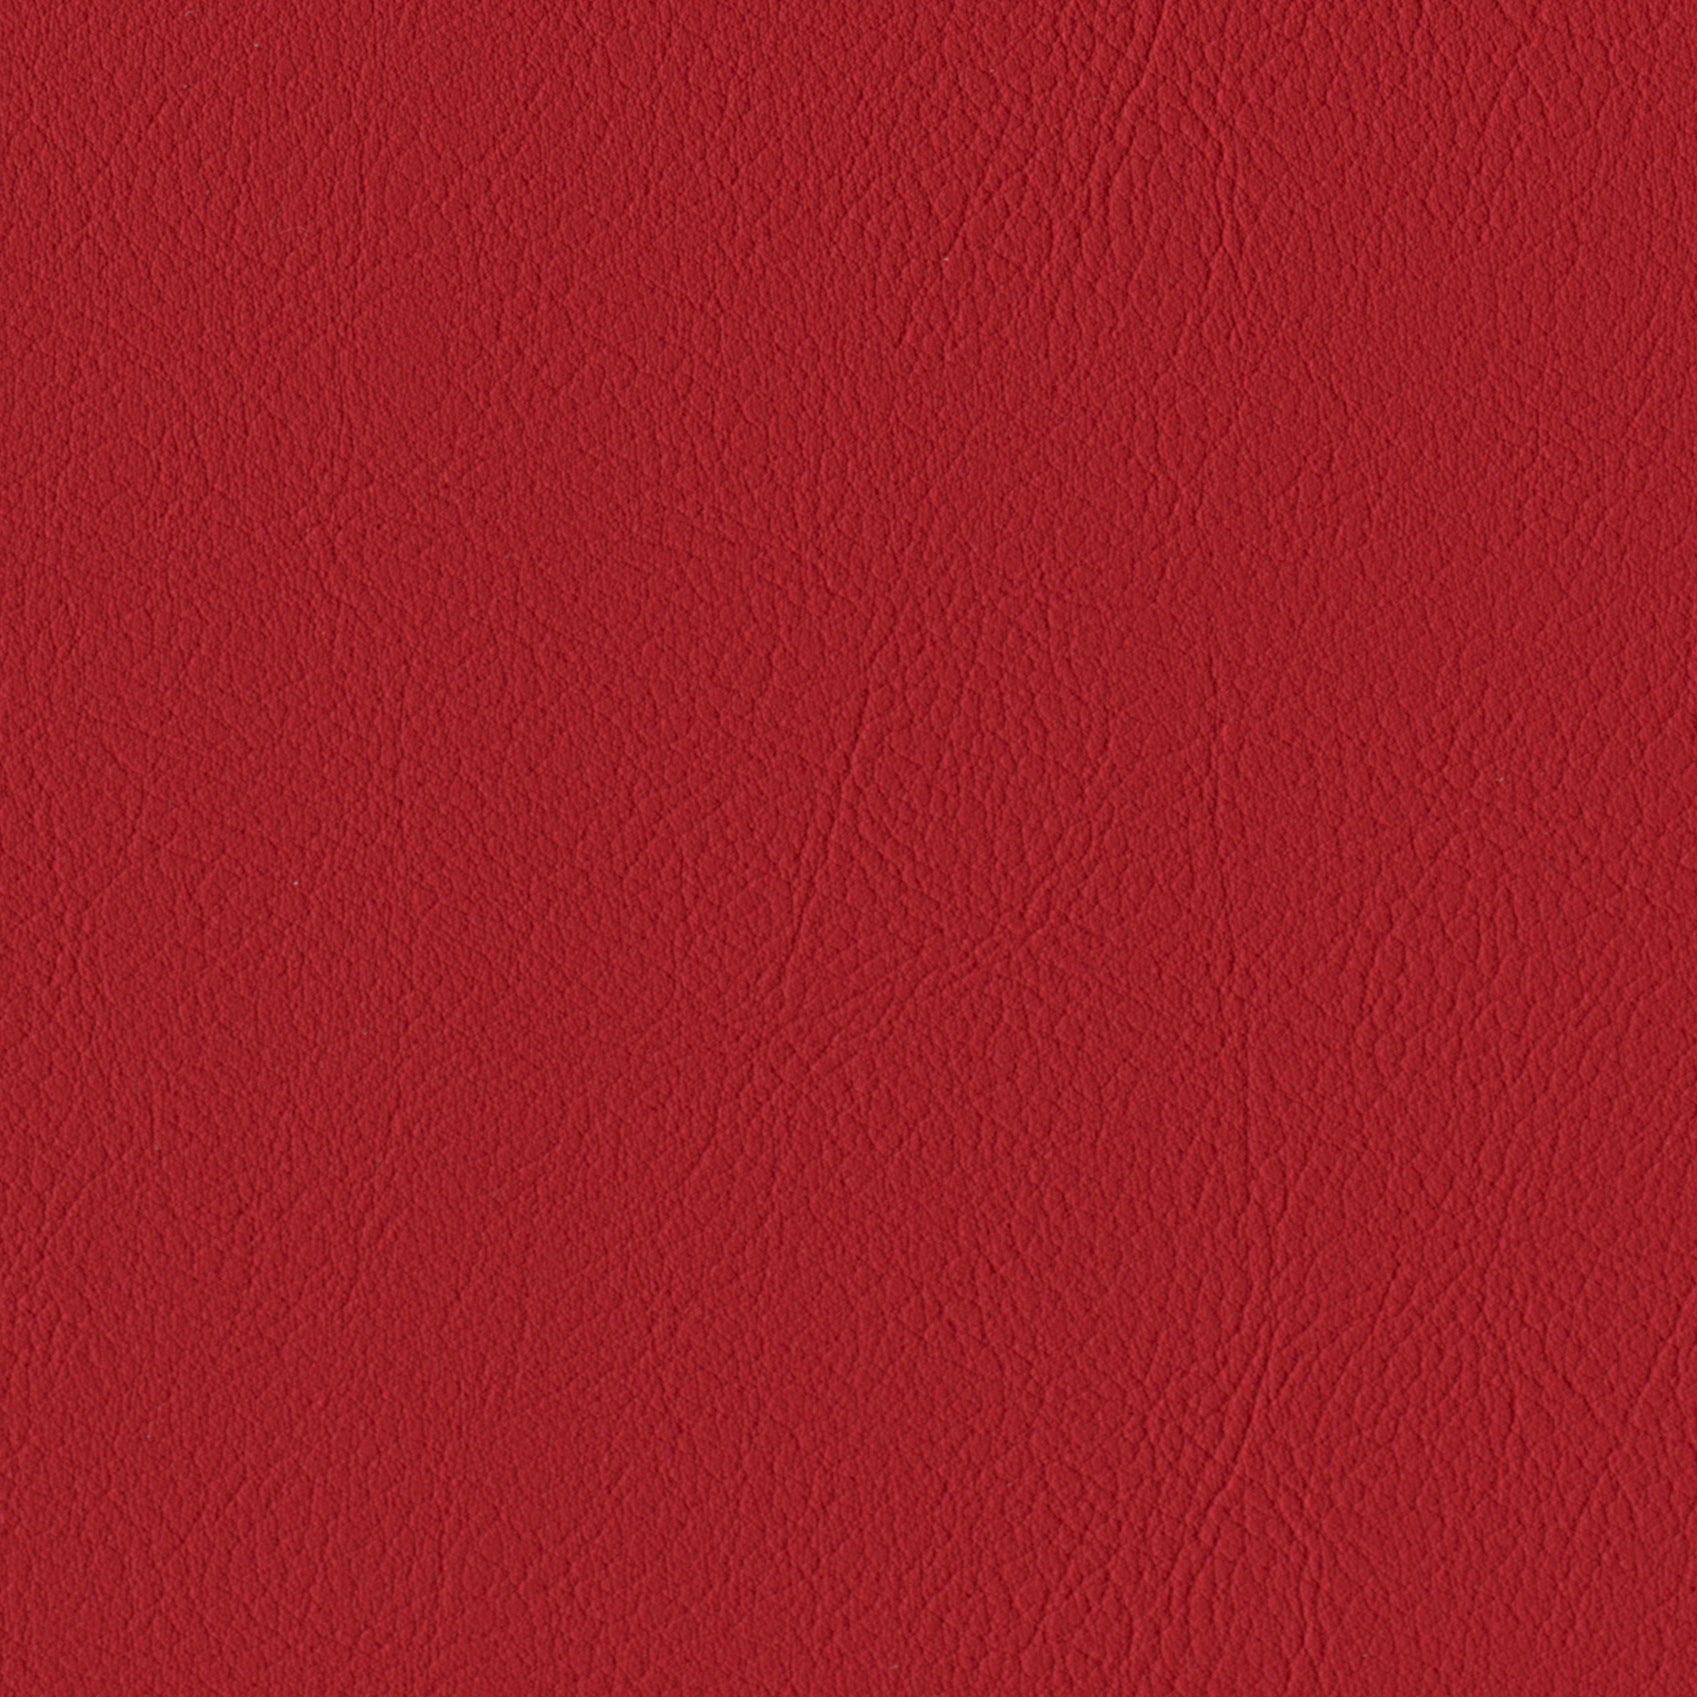    Andriali-Contract-Vinyl_Upholstery-Design-LegacyFR-Color-220Cherry-Width-140cm